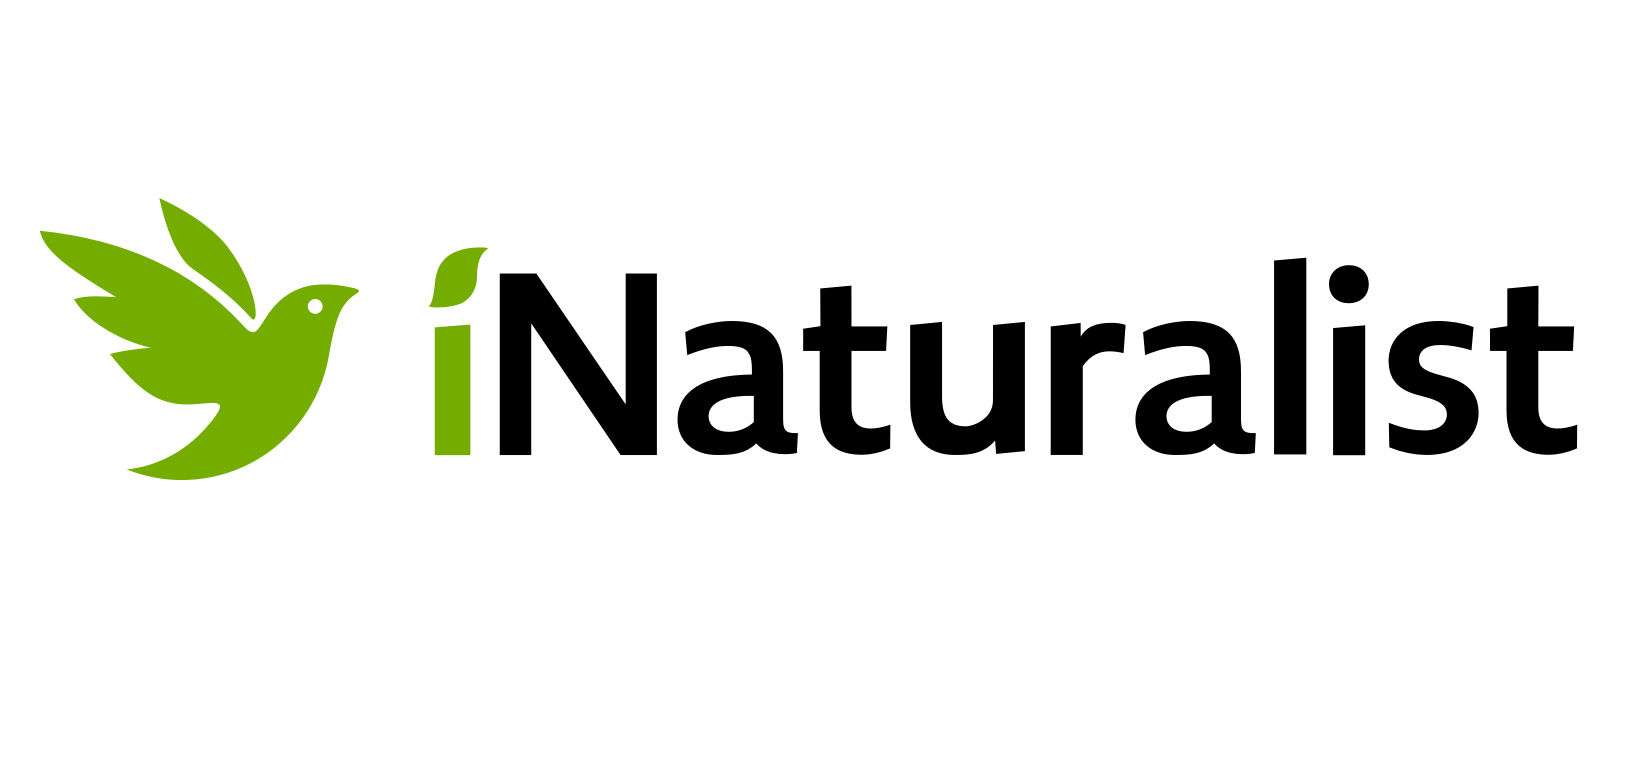 iNaturalist is a citizen science project and online social network of natur...